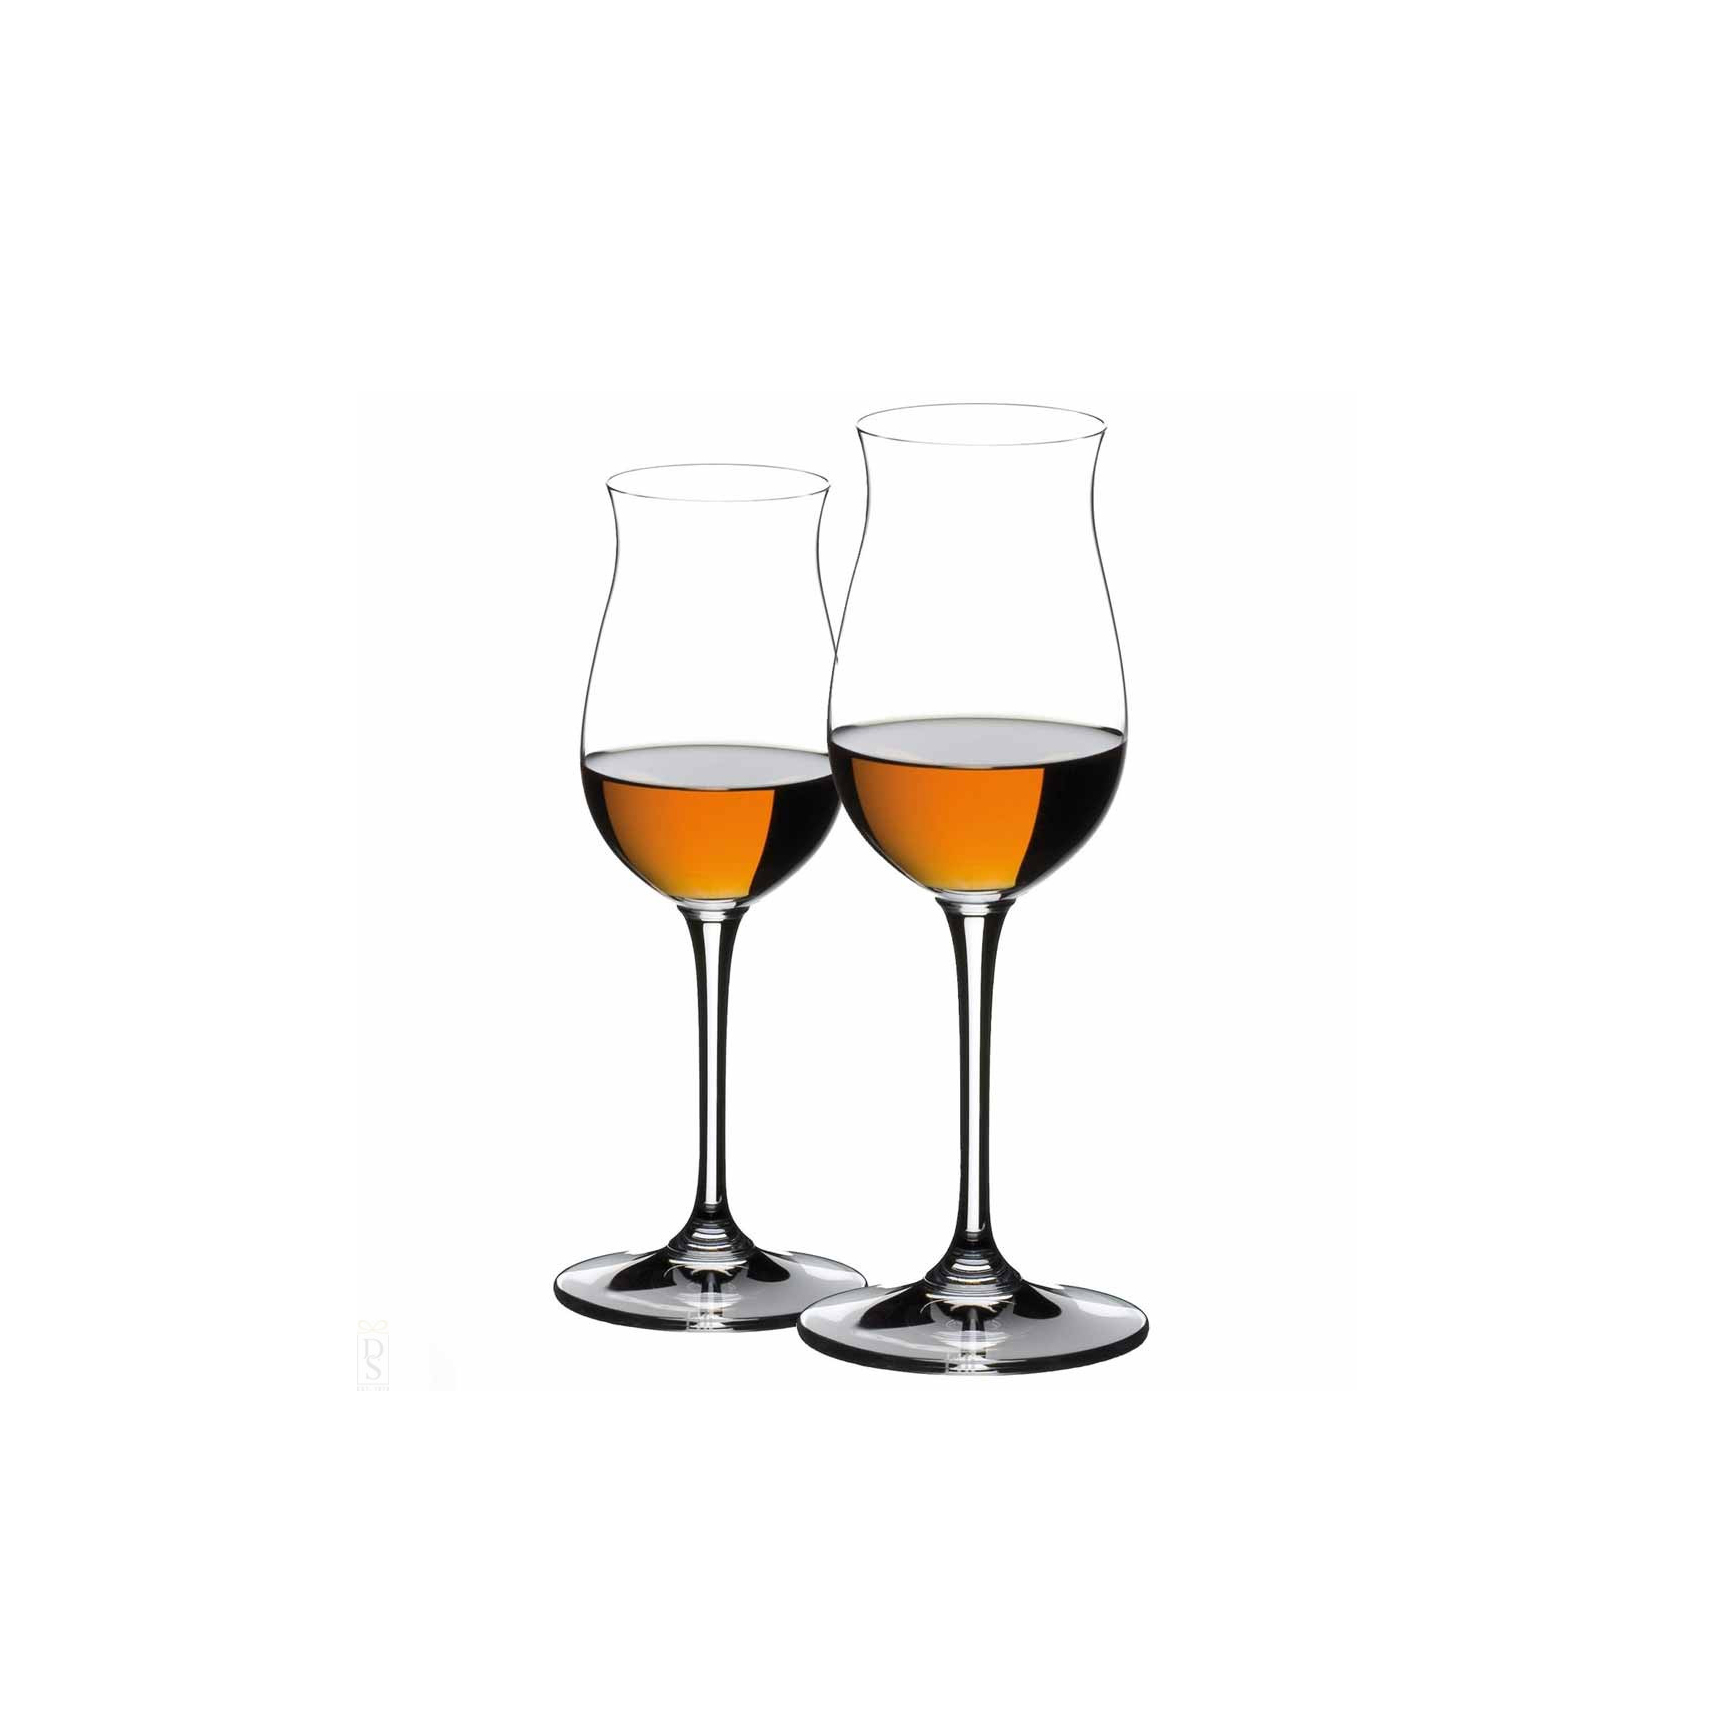 Details about   RIEDEL SOMMELIER COGNAC HENNESSY COLLECTOR GLASSES $49.99 FOR PAIR. 